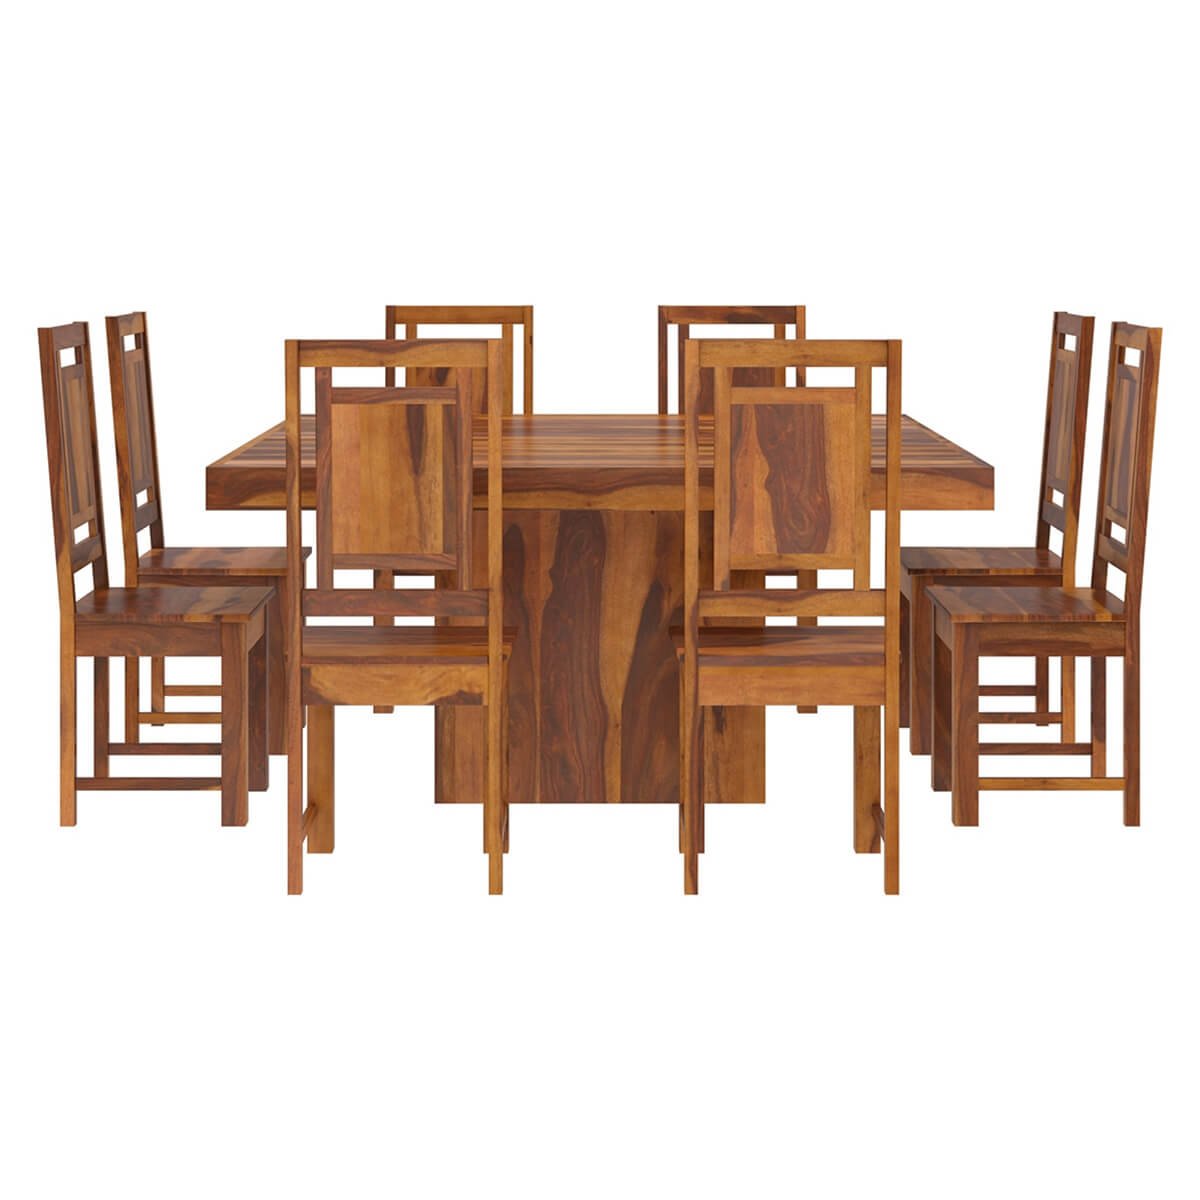 Stockholm Solid Wood Square Pedestal Dining Table and Chair Set